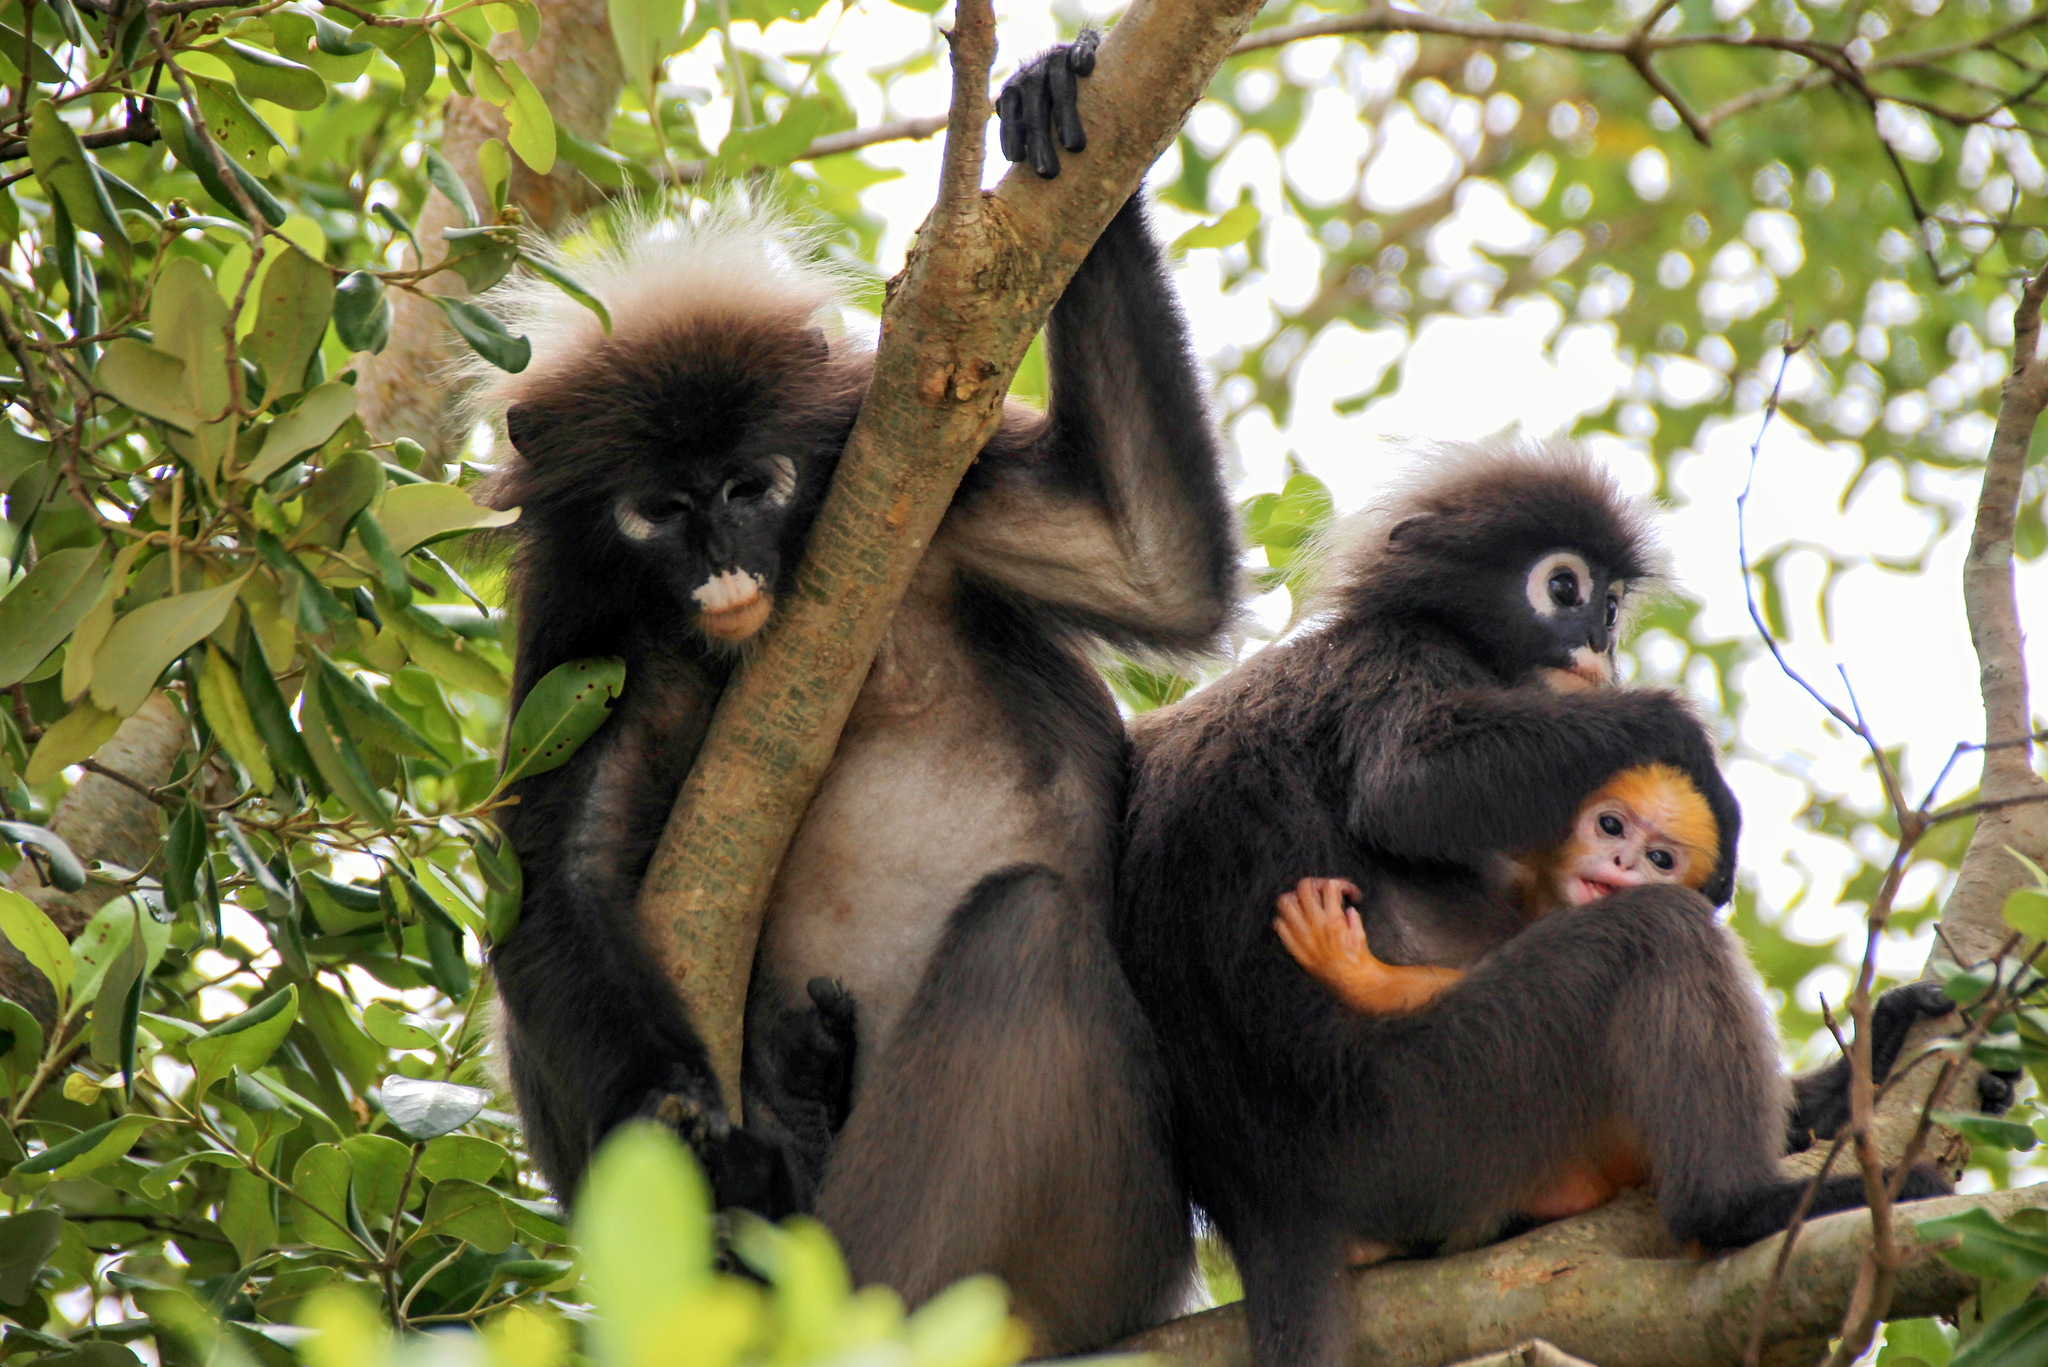 Dusky leaf monkey, spectacled langur, or spectacled leaf monkey  (Trachypithecus obscurus)